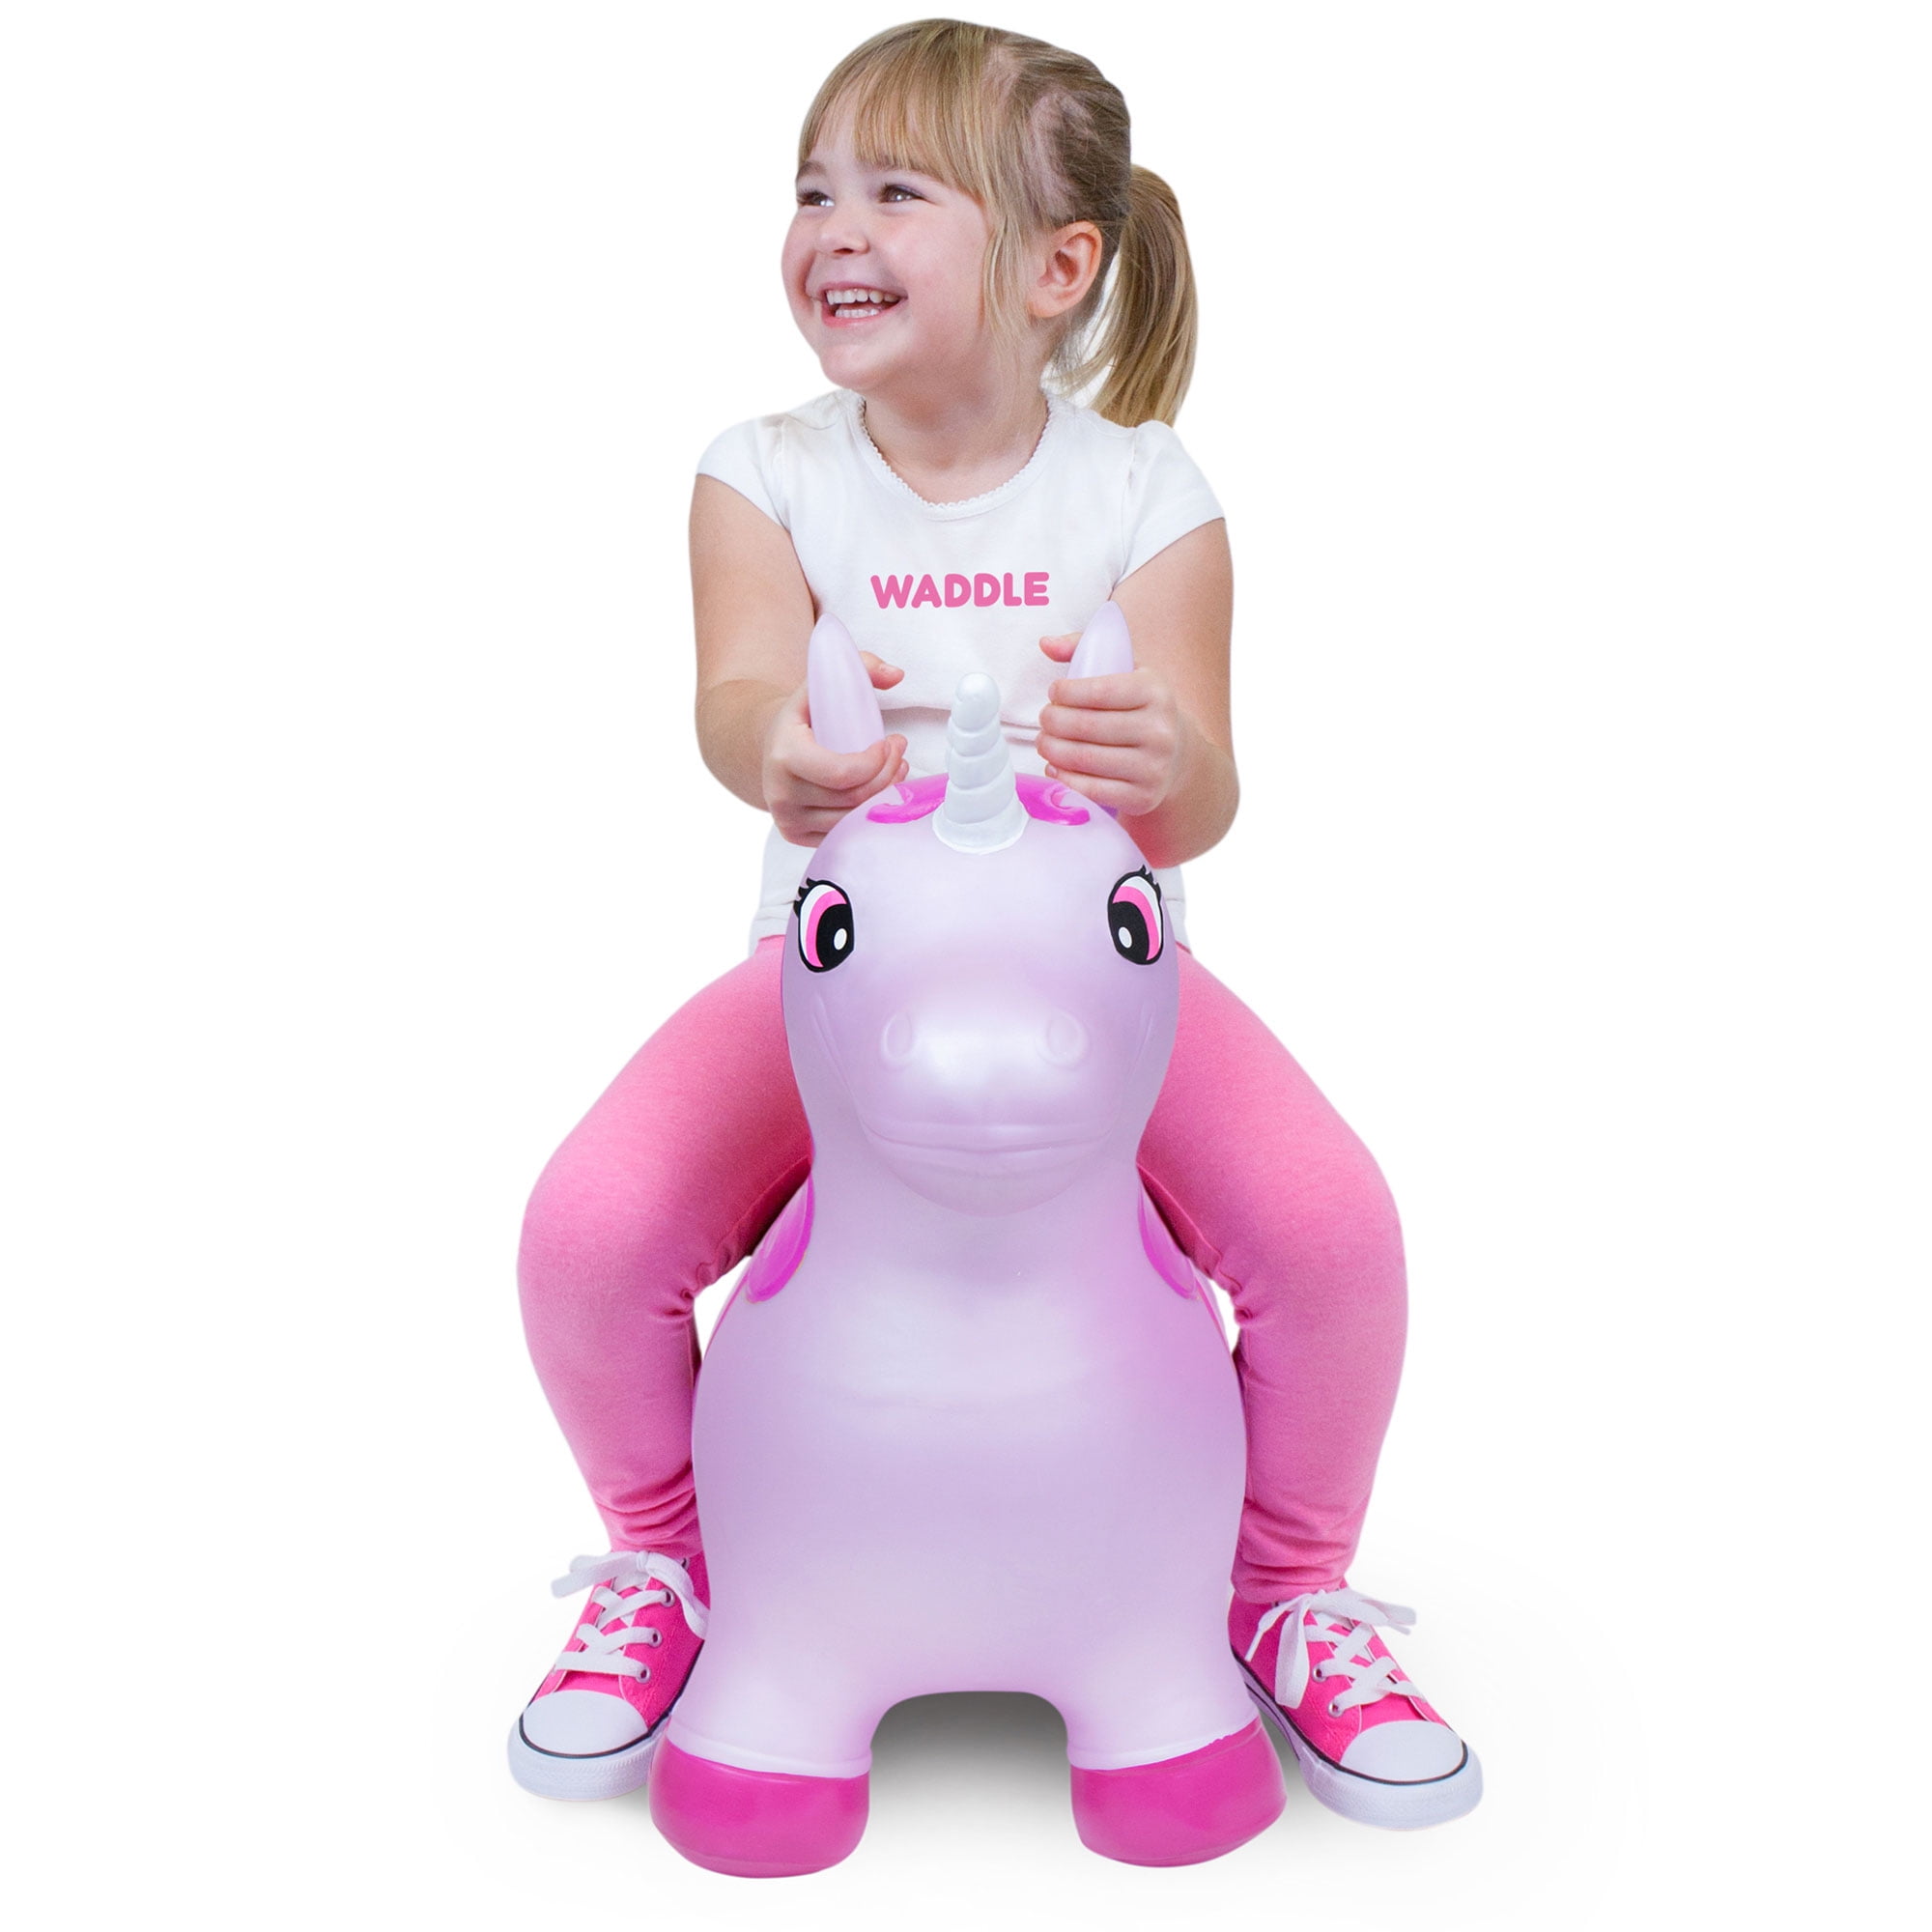 Kids Inflatable Unicorn Hopper Ball Hippity Hop Jumping Ride Toy Bouncer Handle